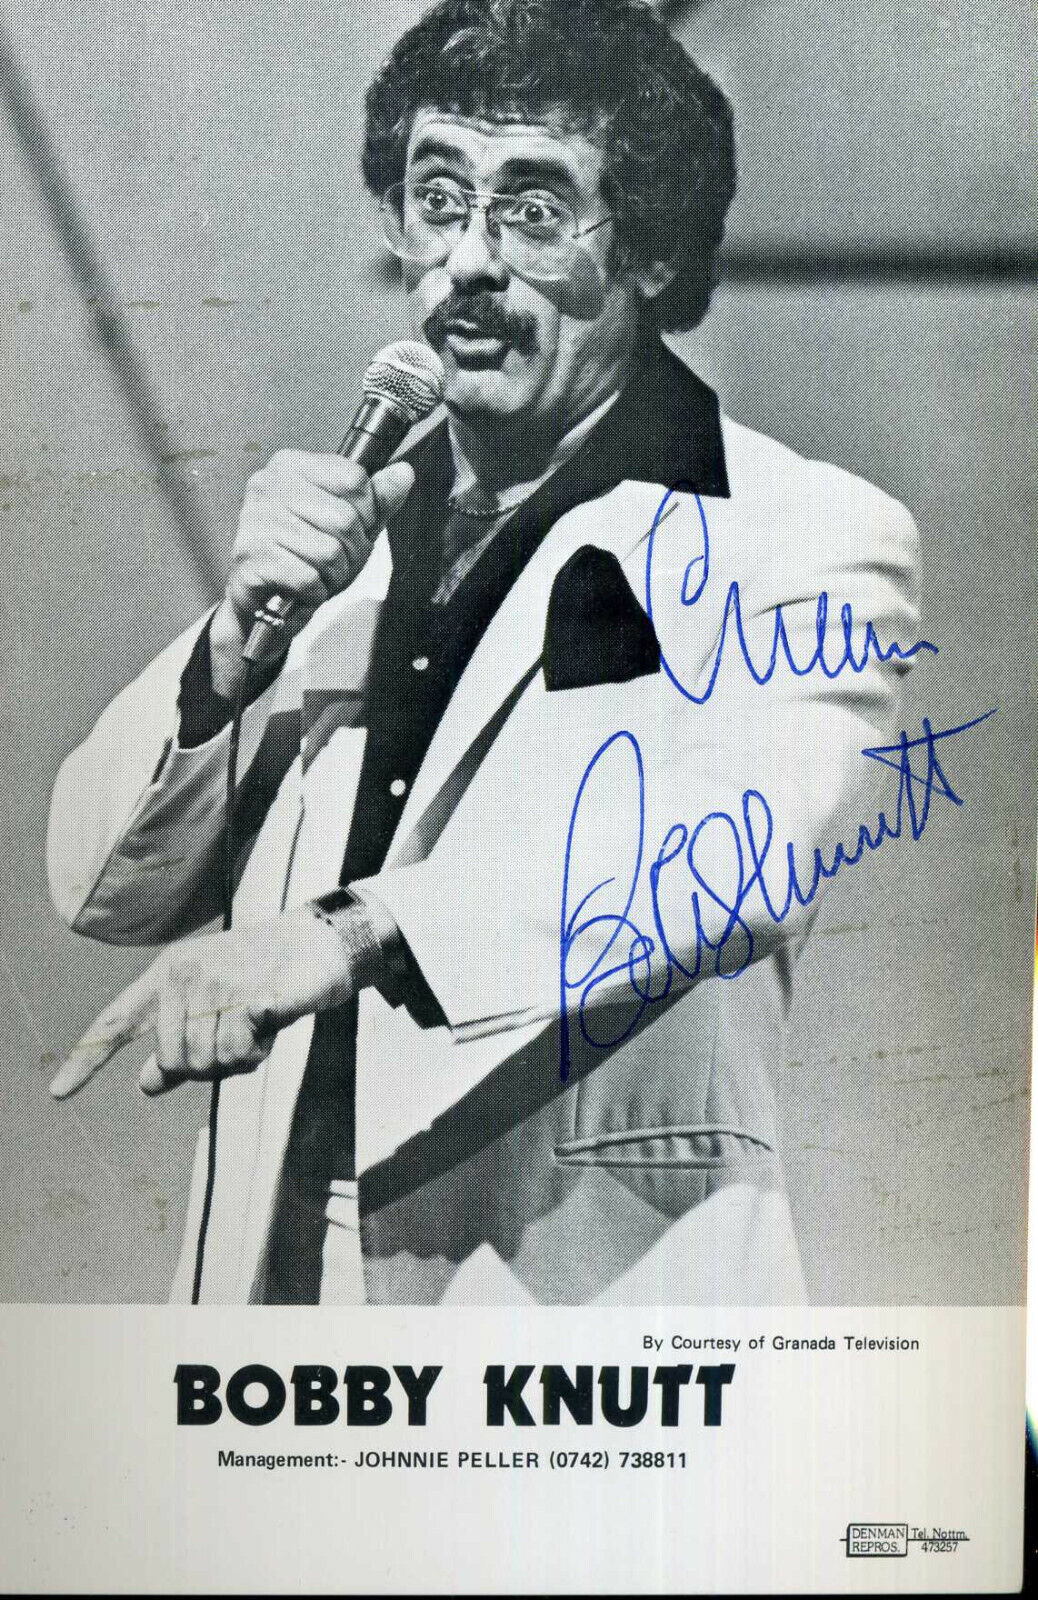 BOBBY KNUTT Signed Photo Poster paintinggraph - Film & TV Actor / Comedian - preprint